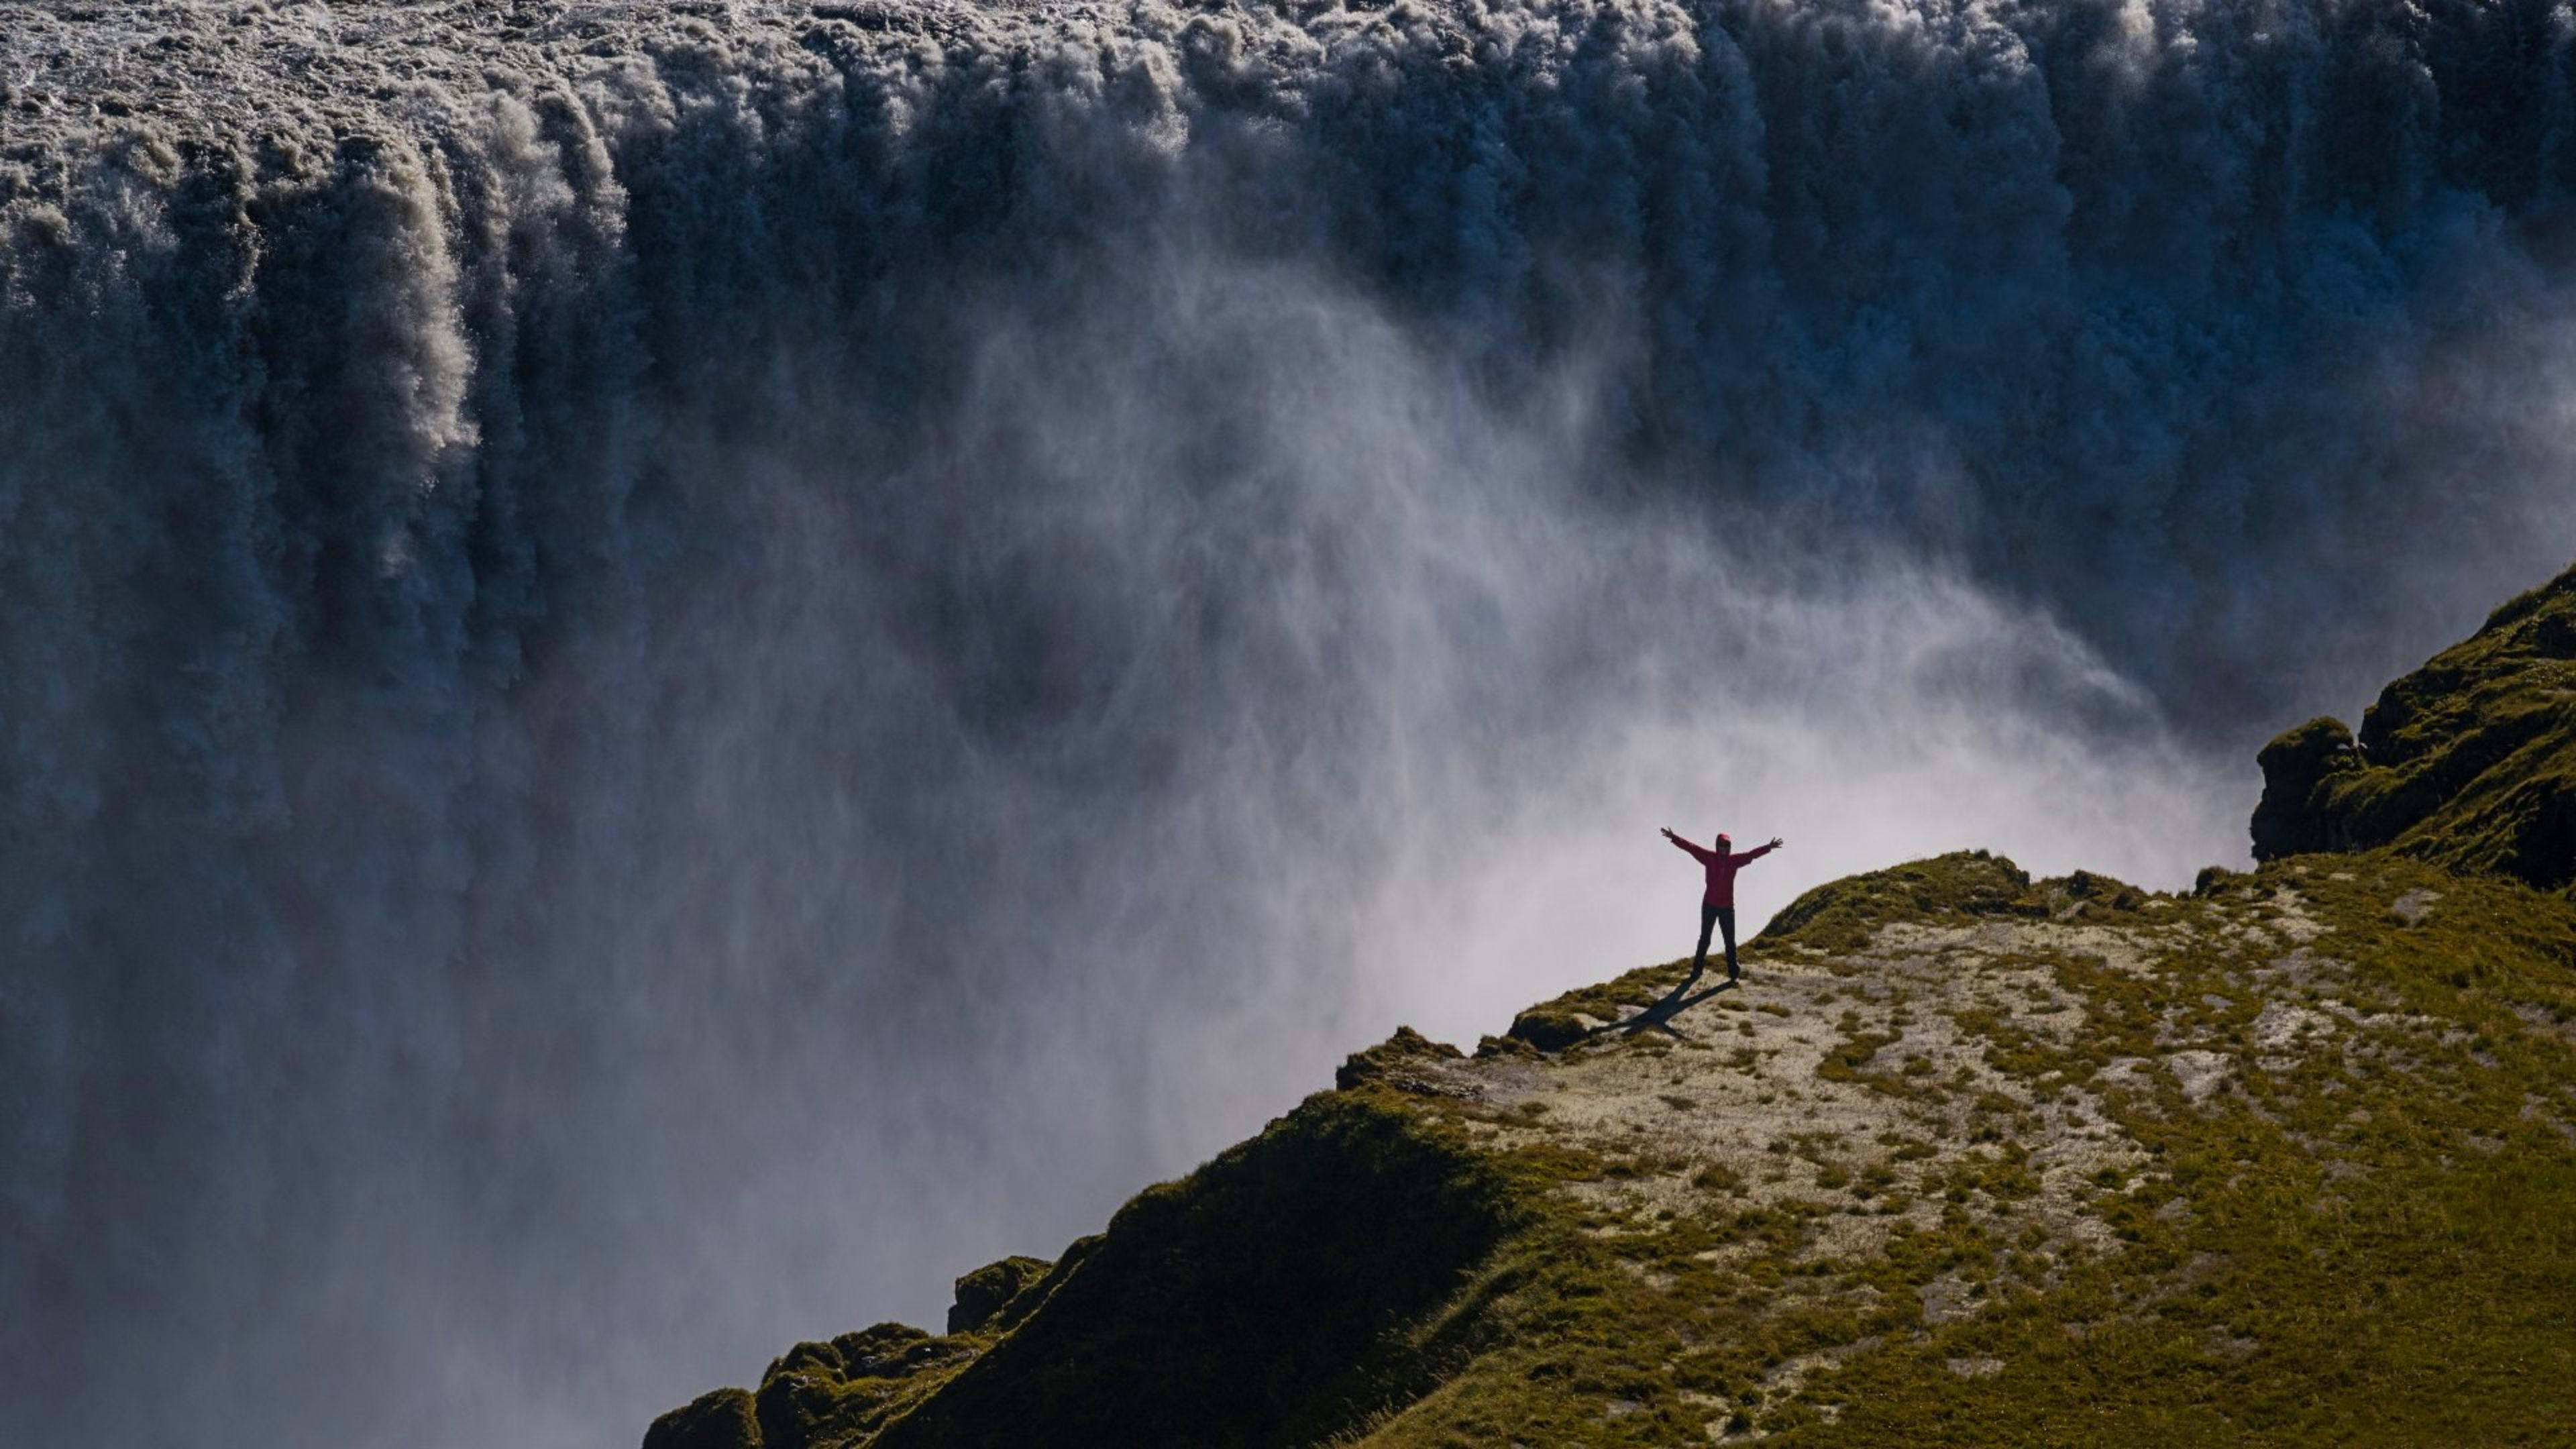 A man standing in front of the Dettifoss waterfall